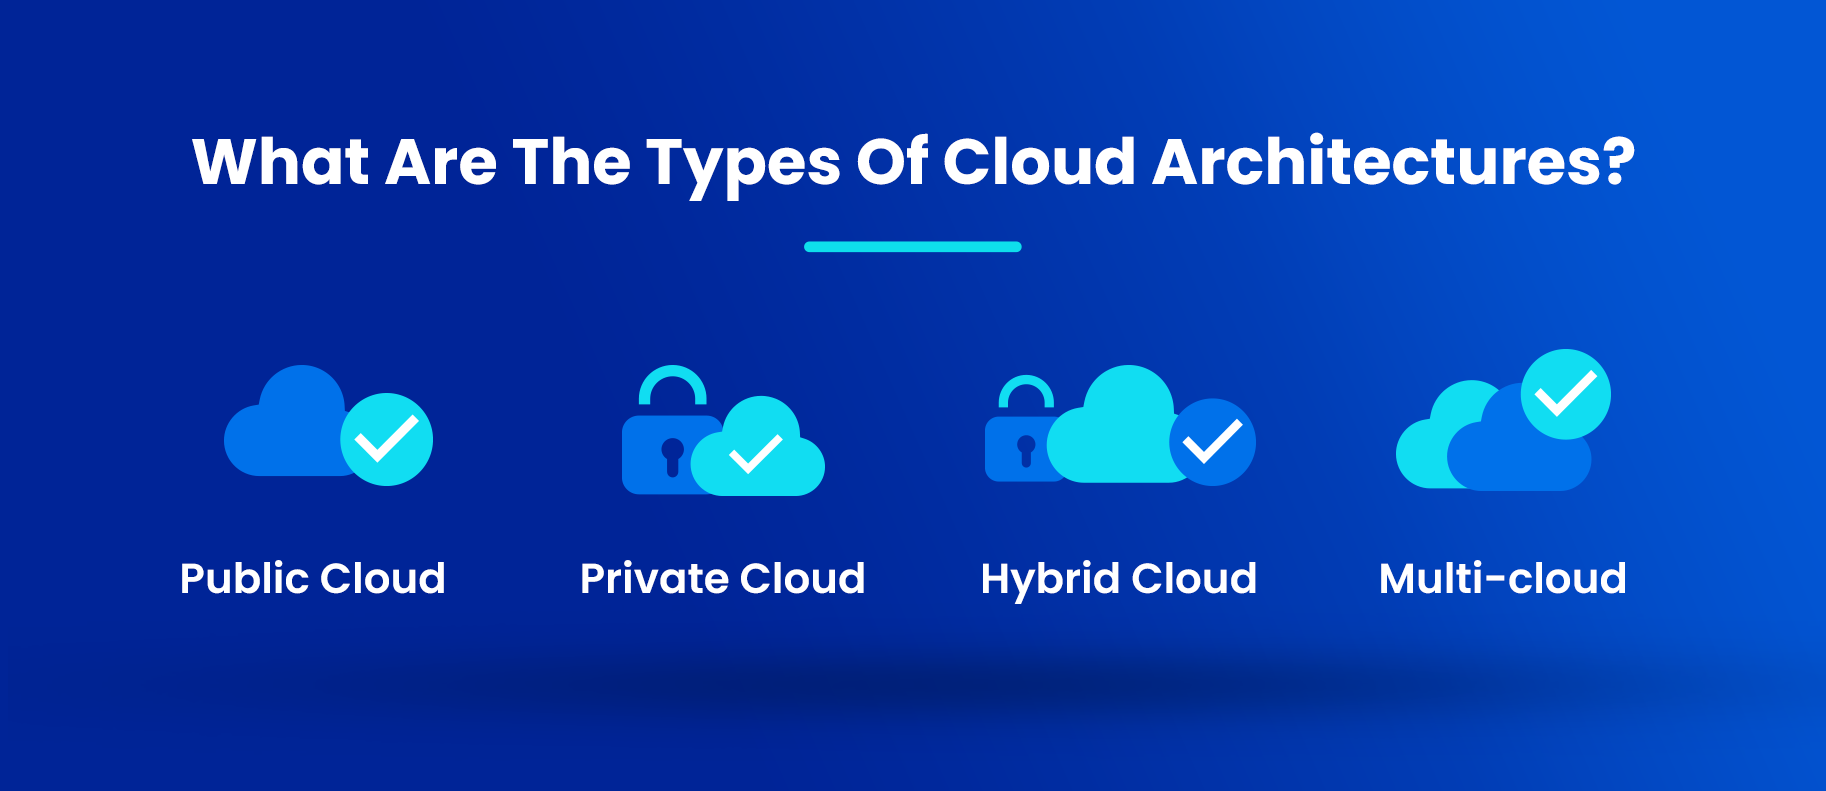 What Are The Types Of Cloud Architectures?